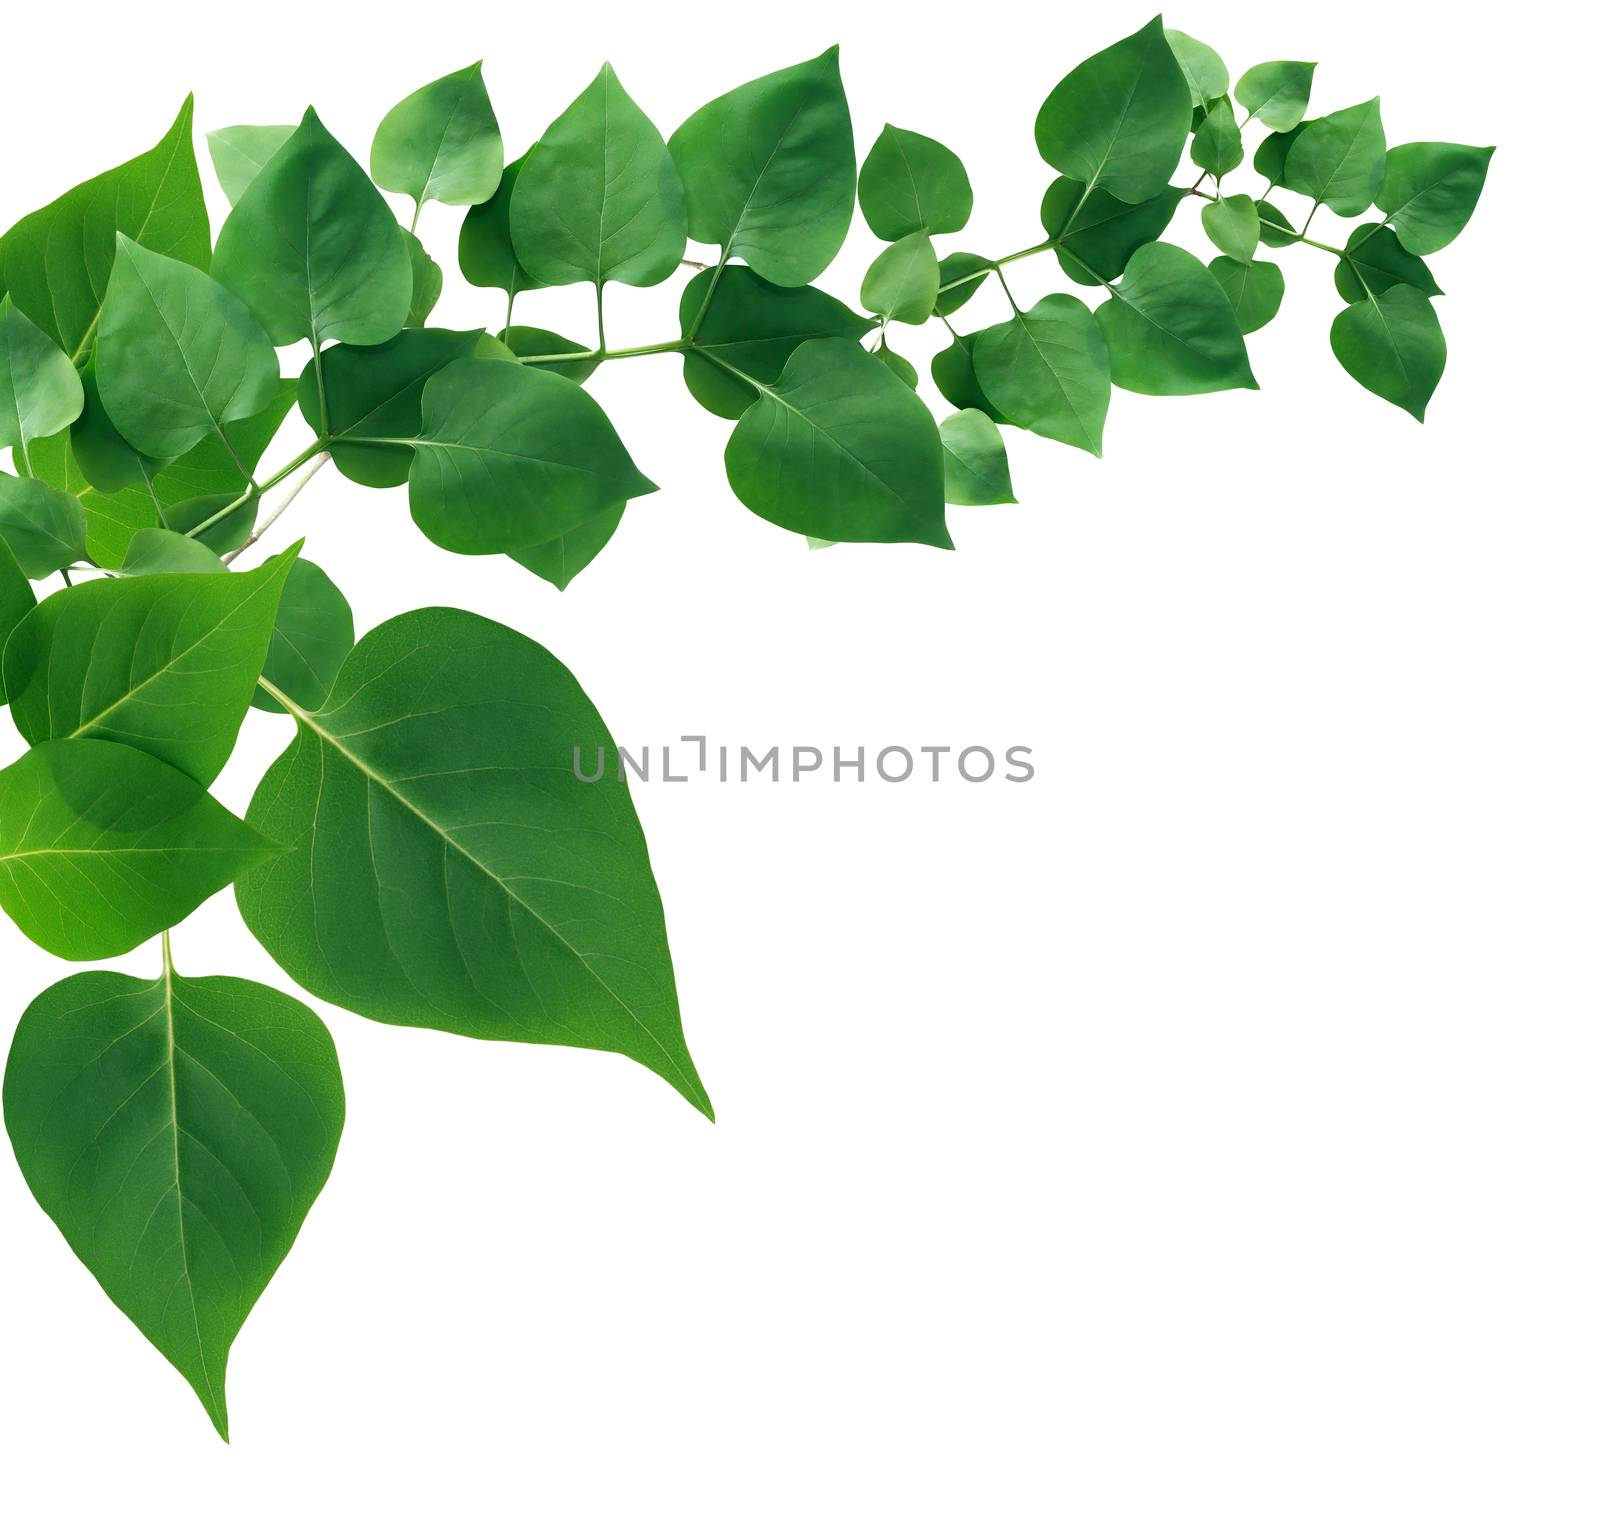 Nice green leaves composition as border on white background